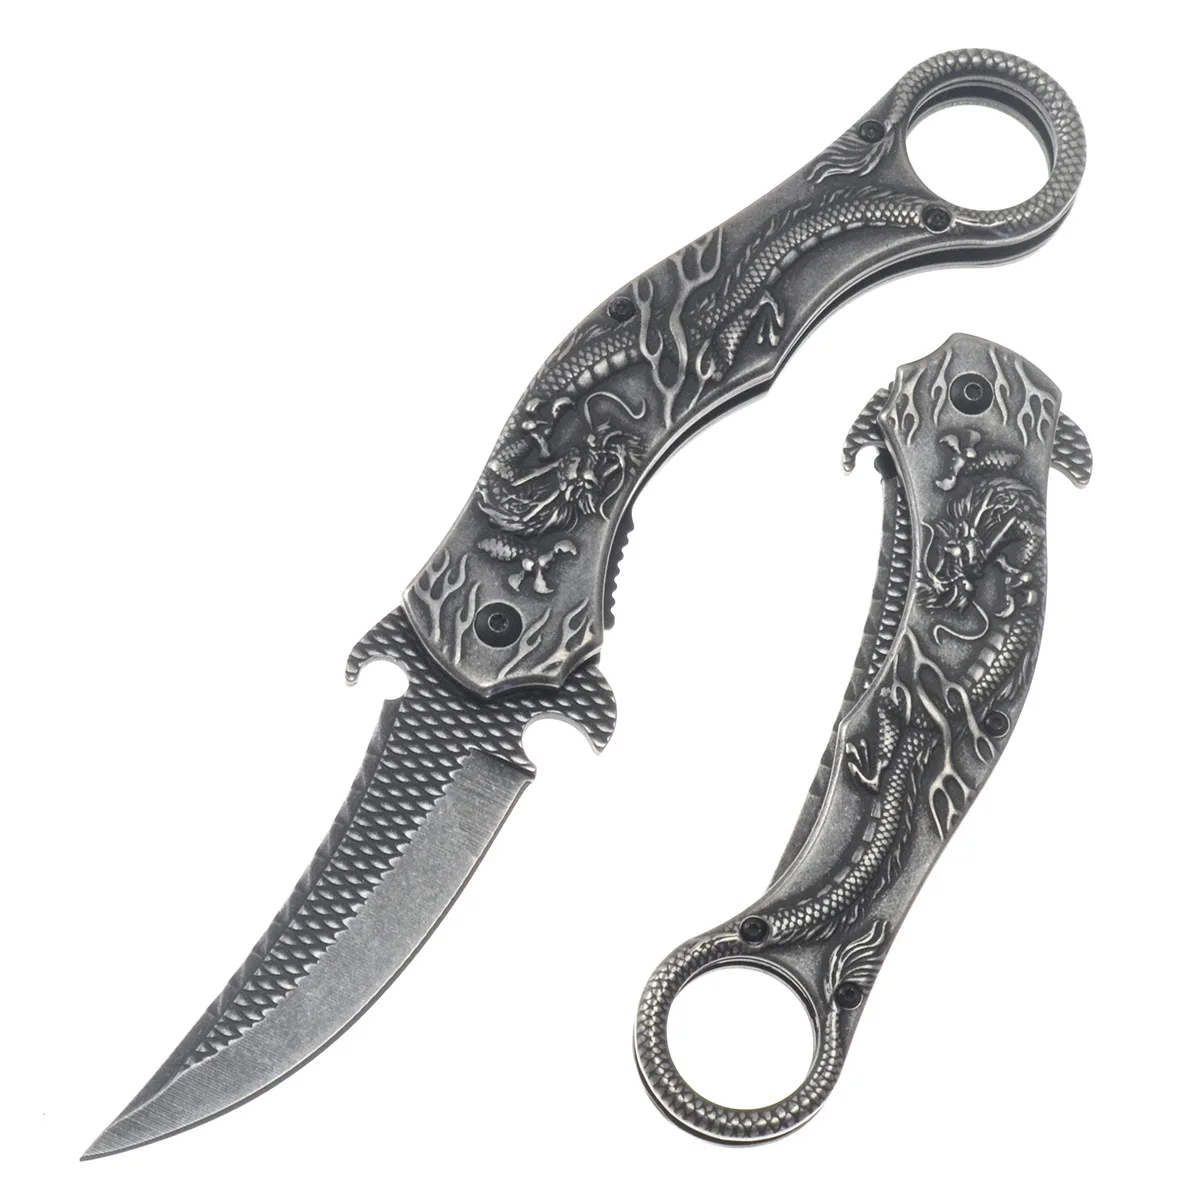 

Stone Wash Finish Stainless Steel 3D Dragon Tactical Folding Knife Sharp Blade Camping Survival Pocket Hunting EDC Tool